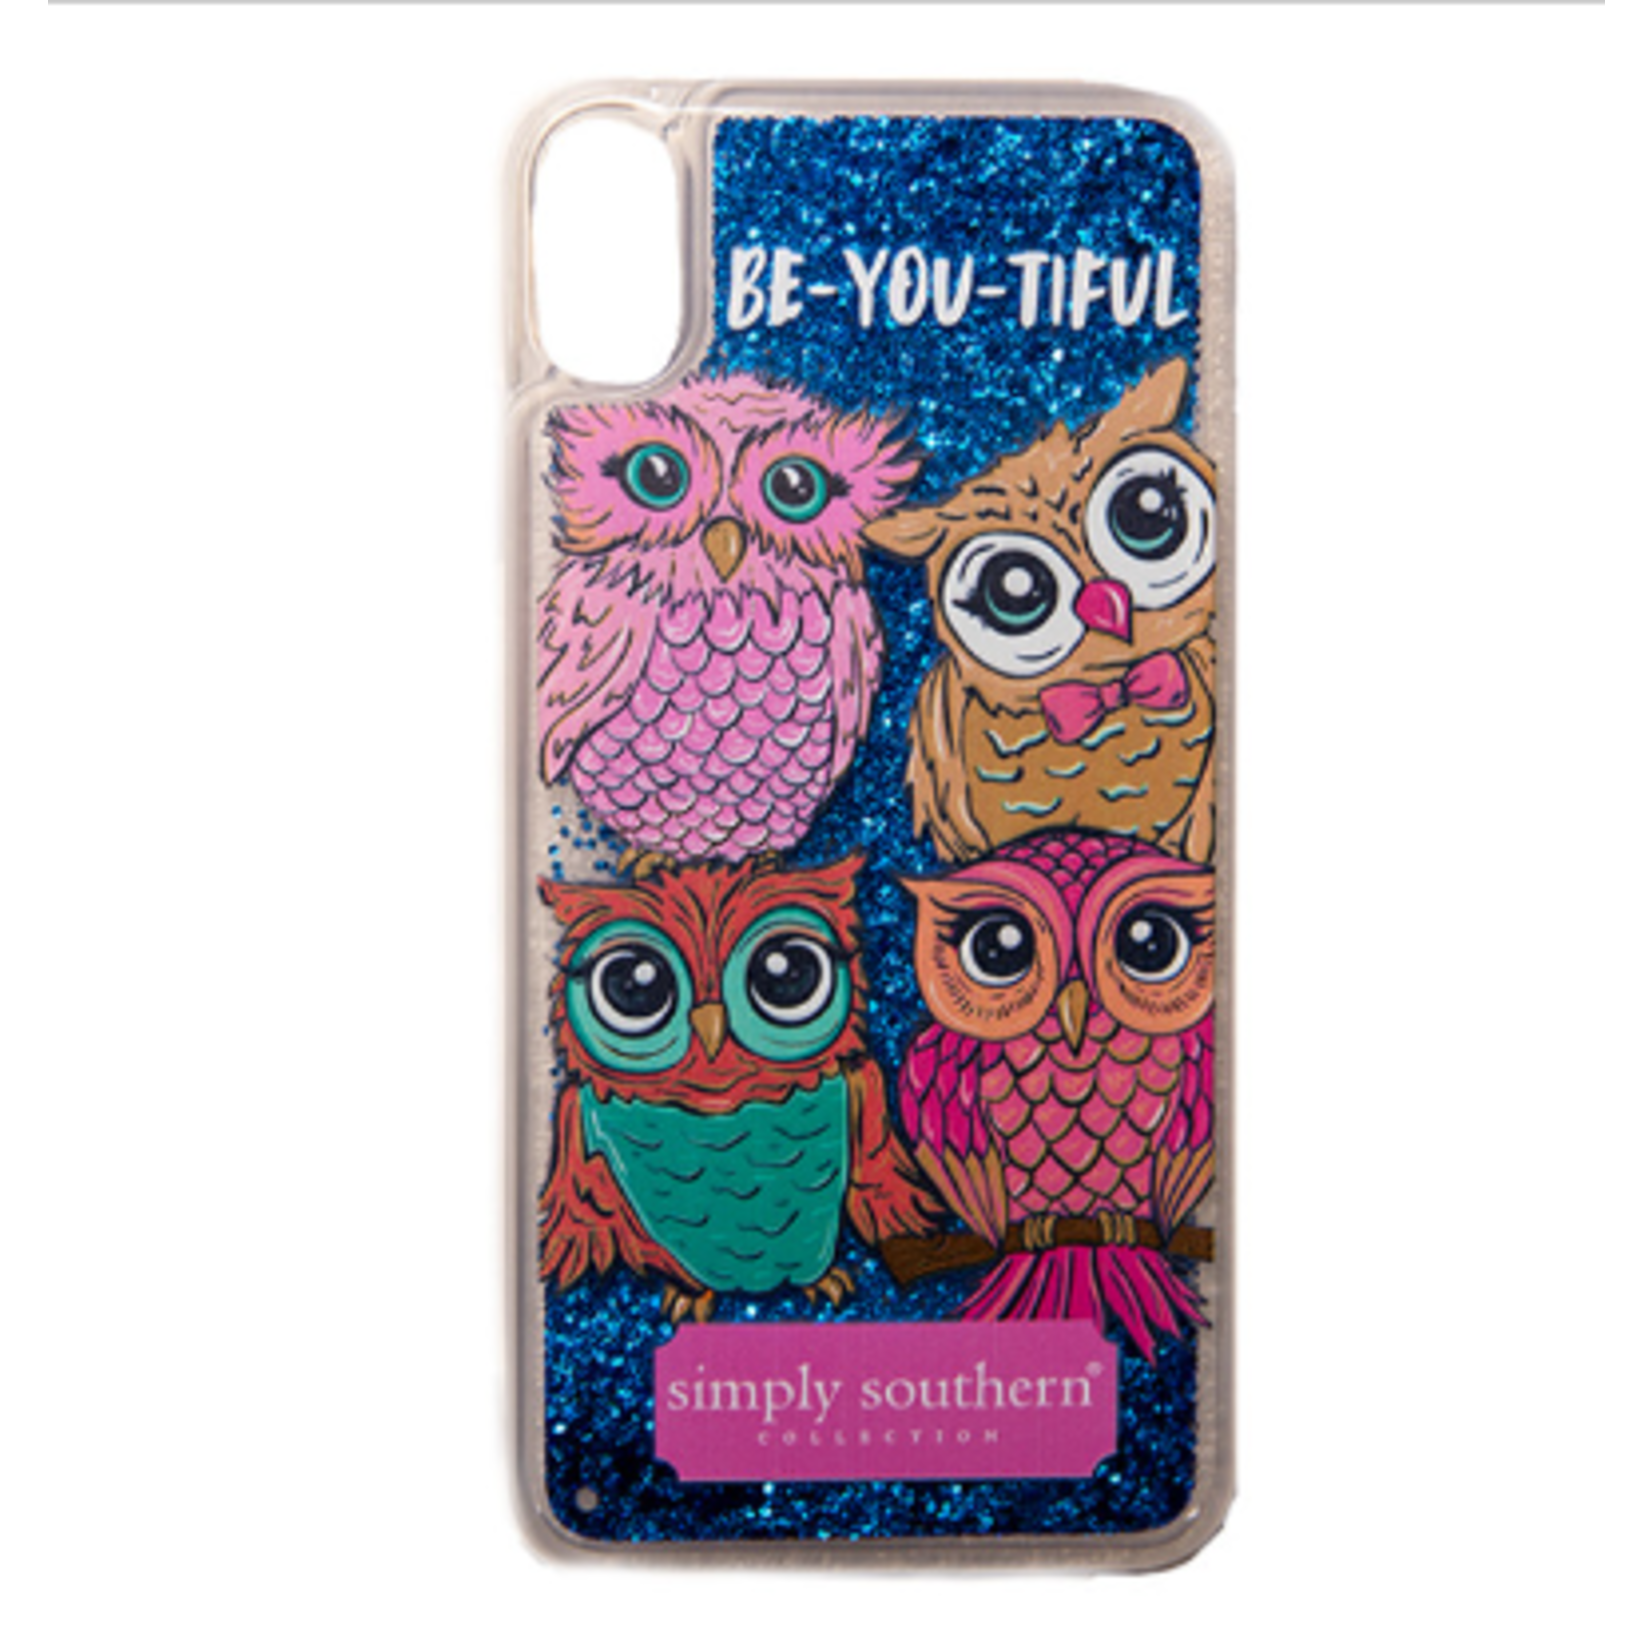 Simply Southern Simply Southern Owl iPhone XS Max Phone Case